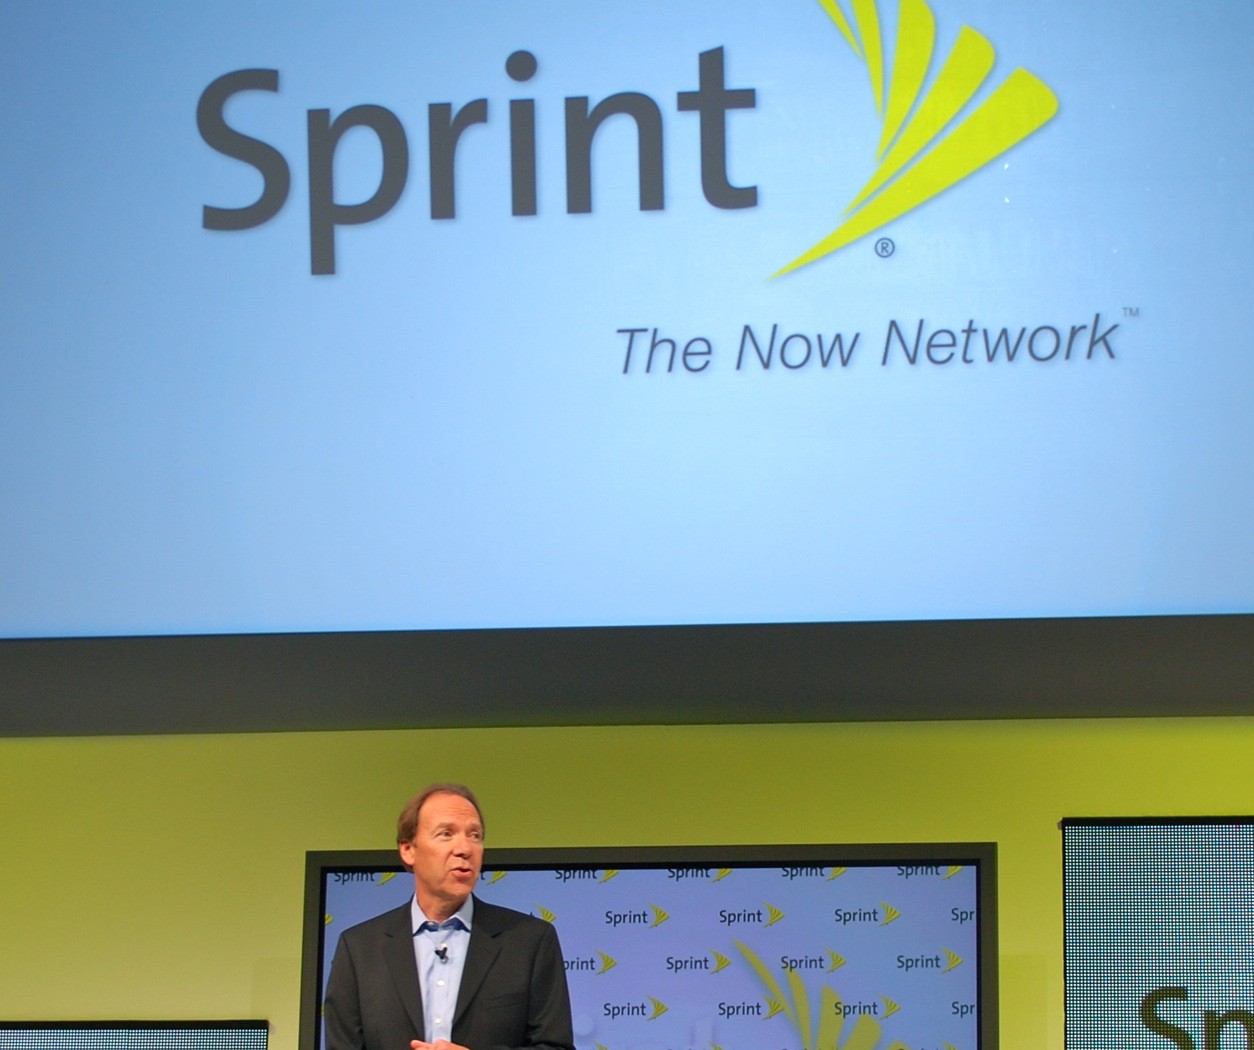 Sprint increasing 3G data plan pricing by $10 per month